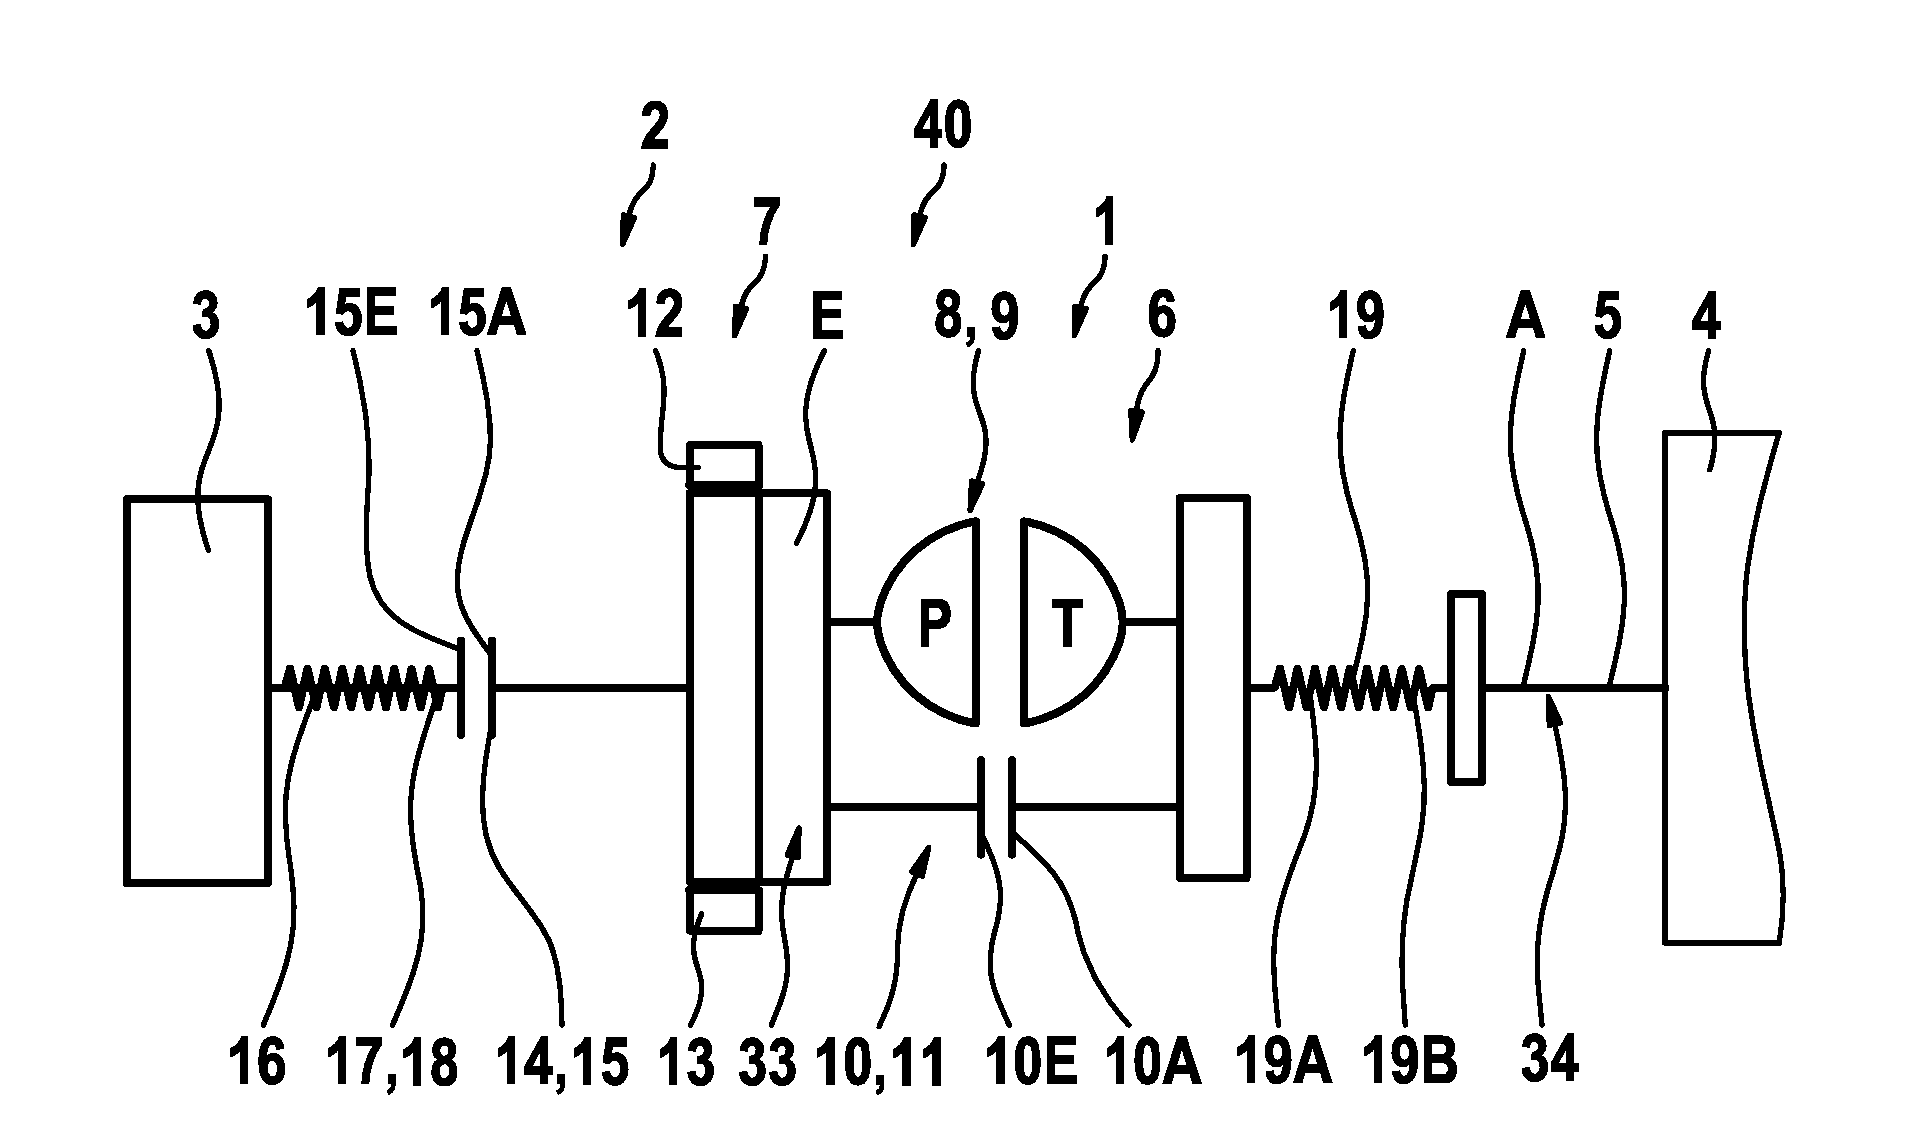 Combined power transmission and drive unit for use in hybrid systems and a hybrid system